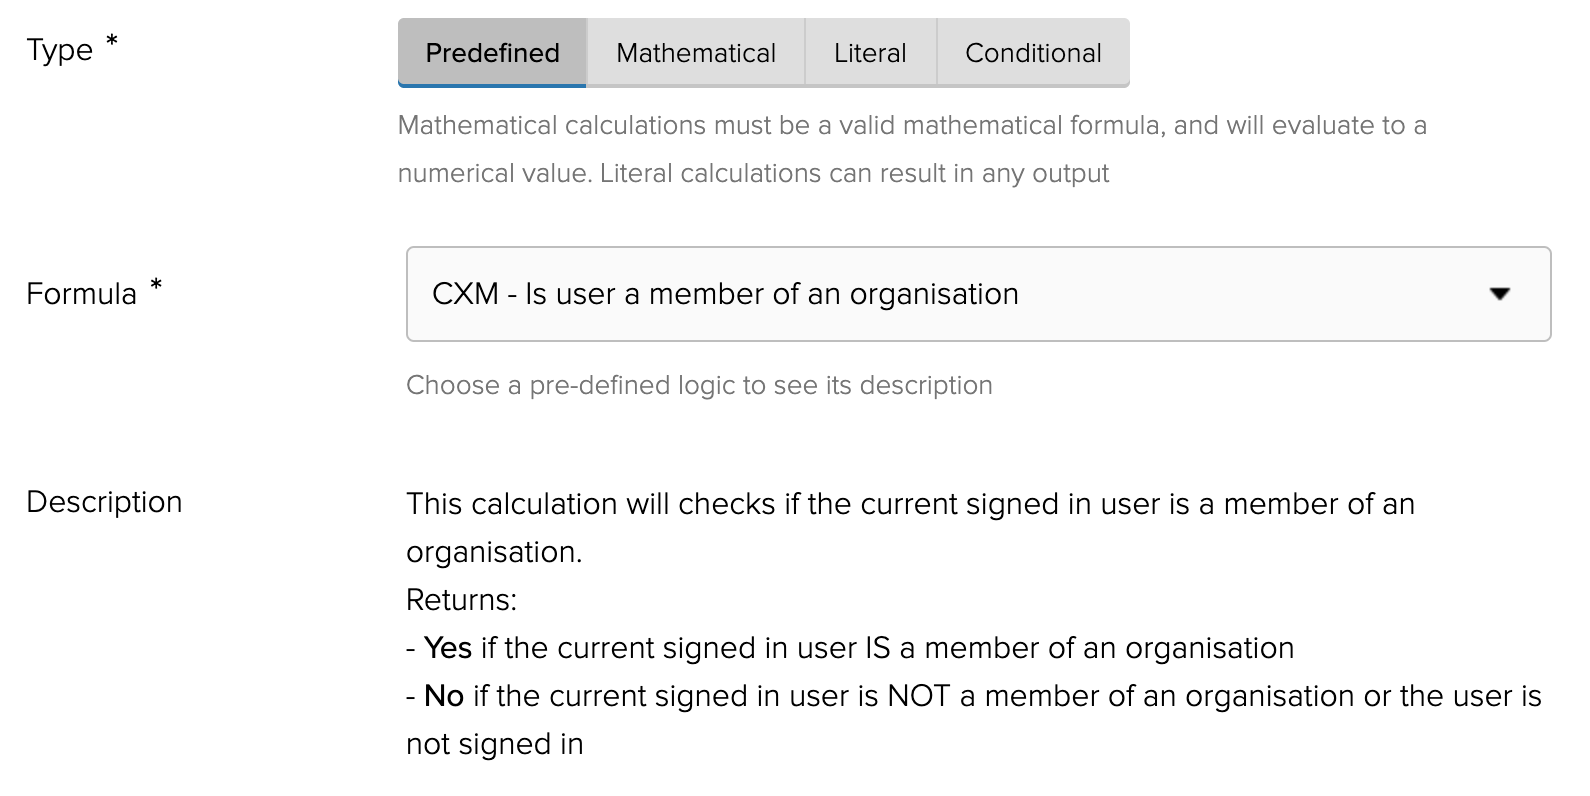 Calculation - Is user a member of an organisation?